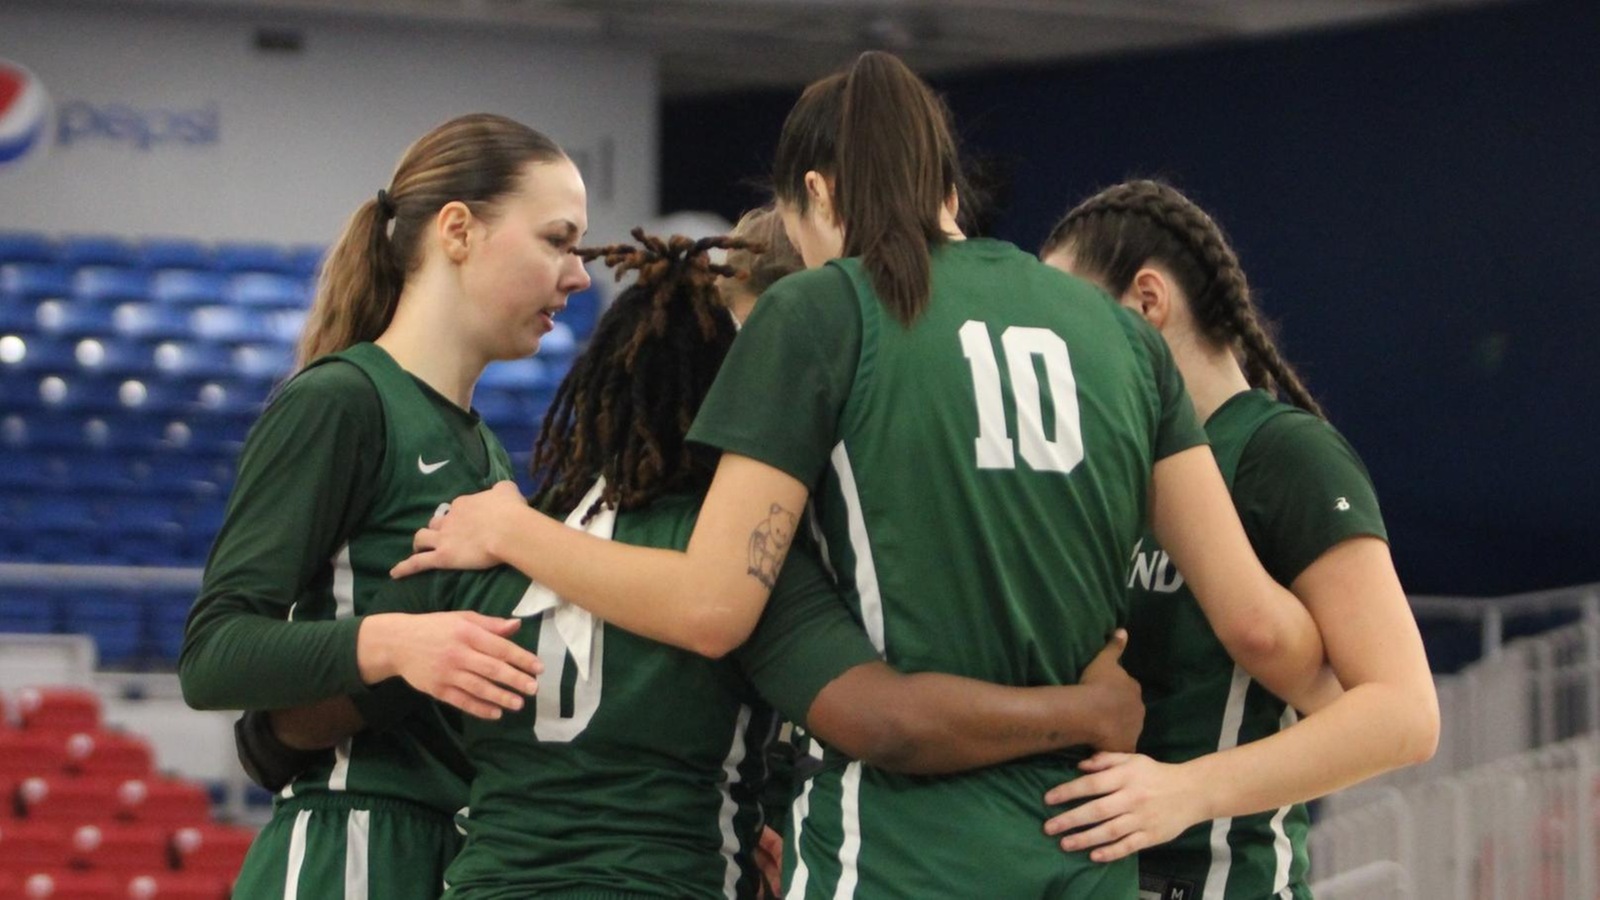 Cleveland State Women's Basketball Returns Home To Host Purdue Fort Wayne